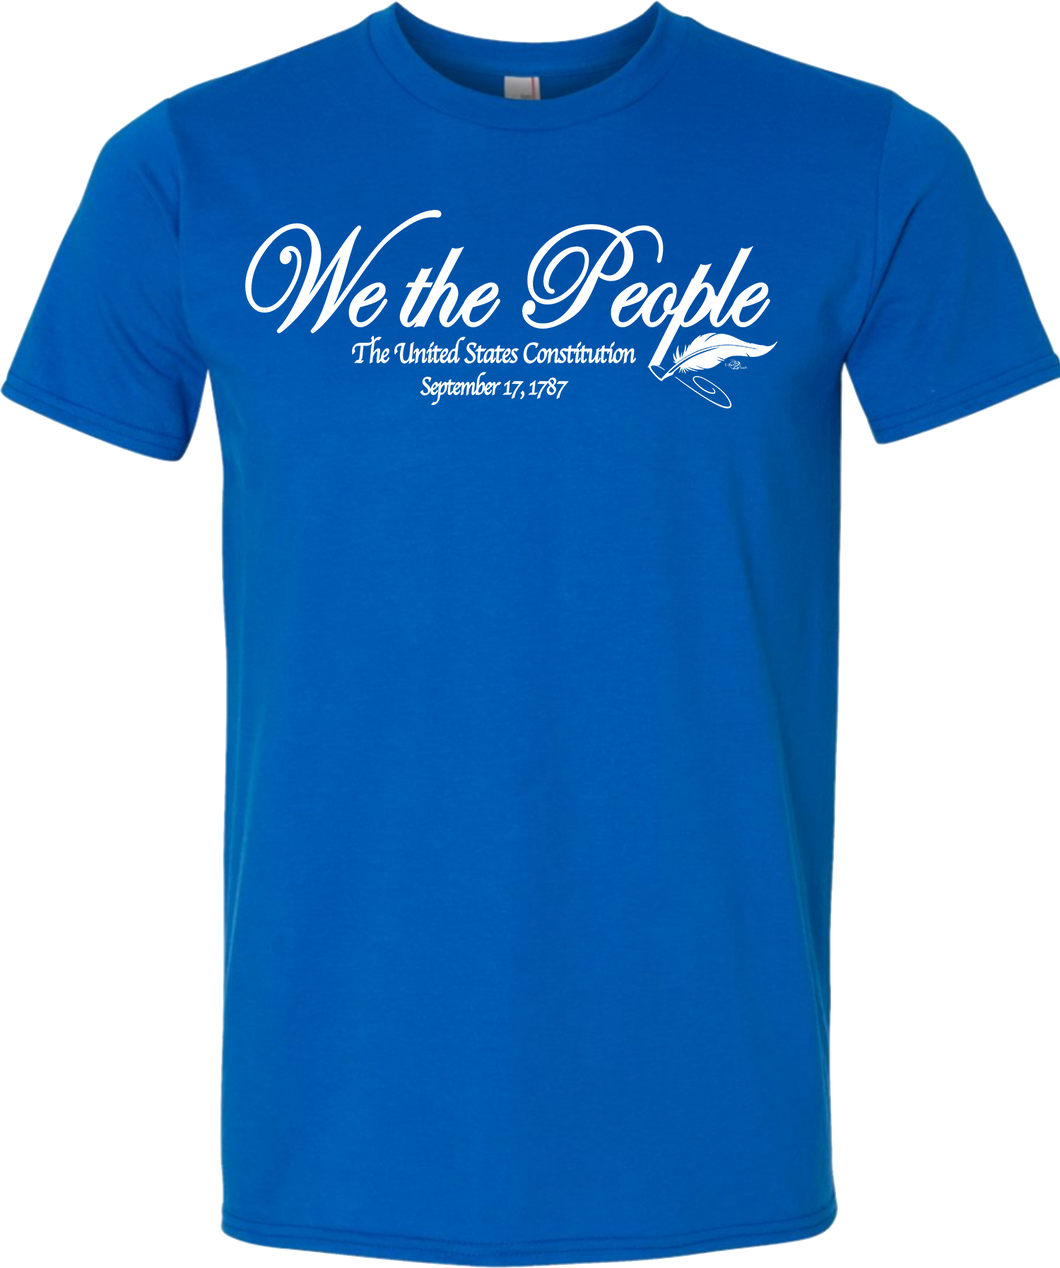 We The People Tee (ONLY Size Small, 3X)